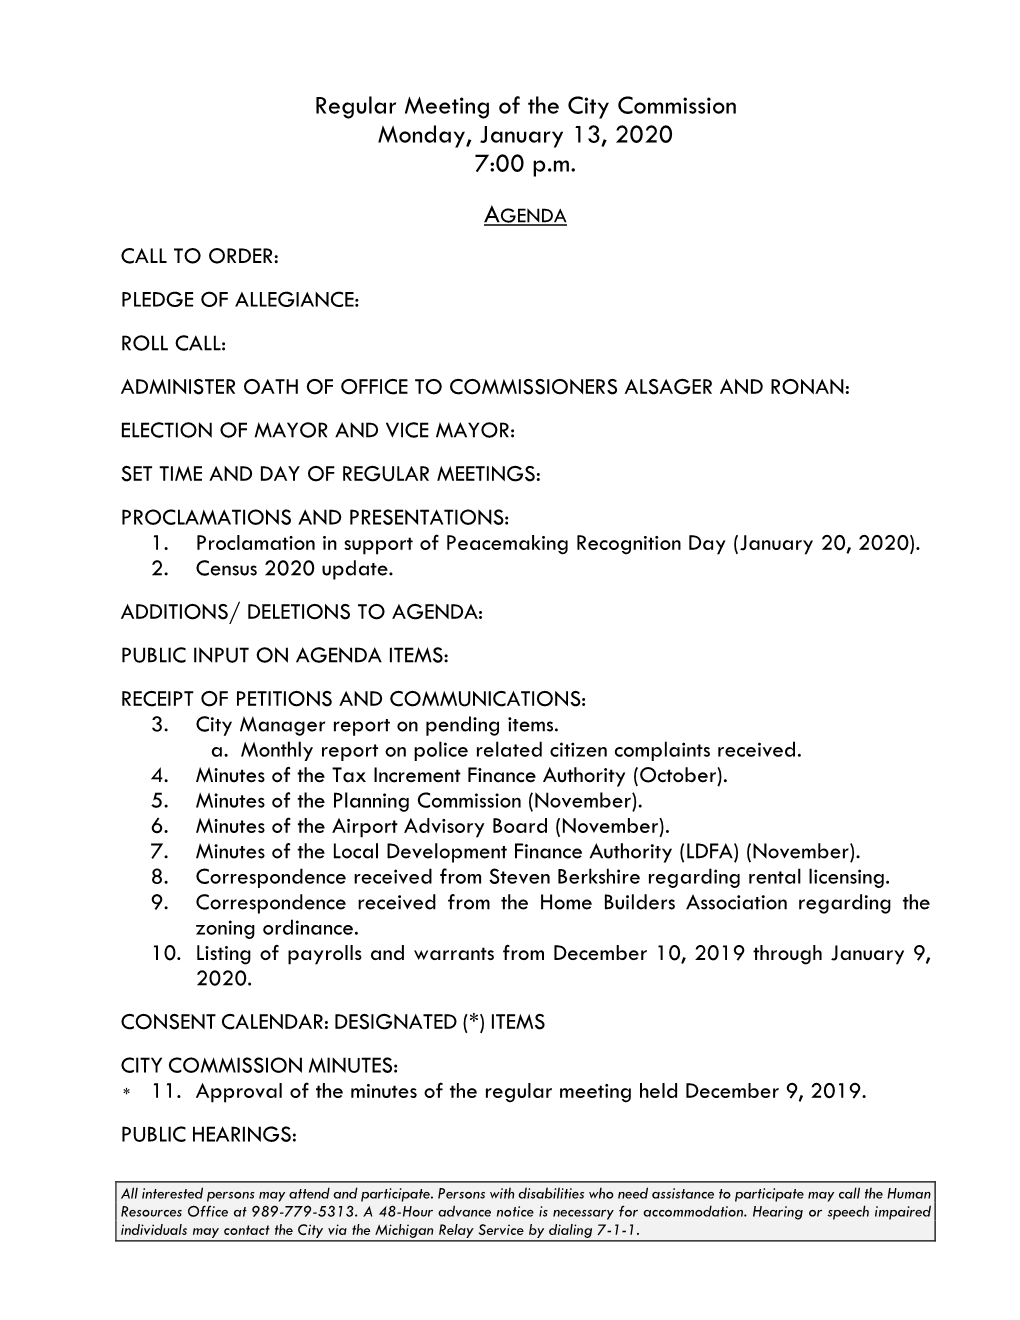 Regular Meeting of the City Commission Monday, January 13, 2020 7:00 P.M